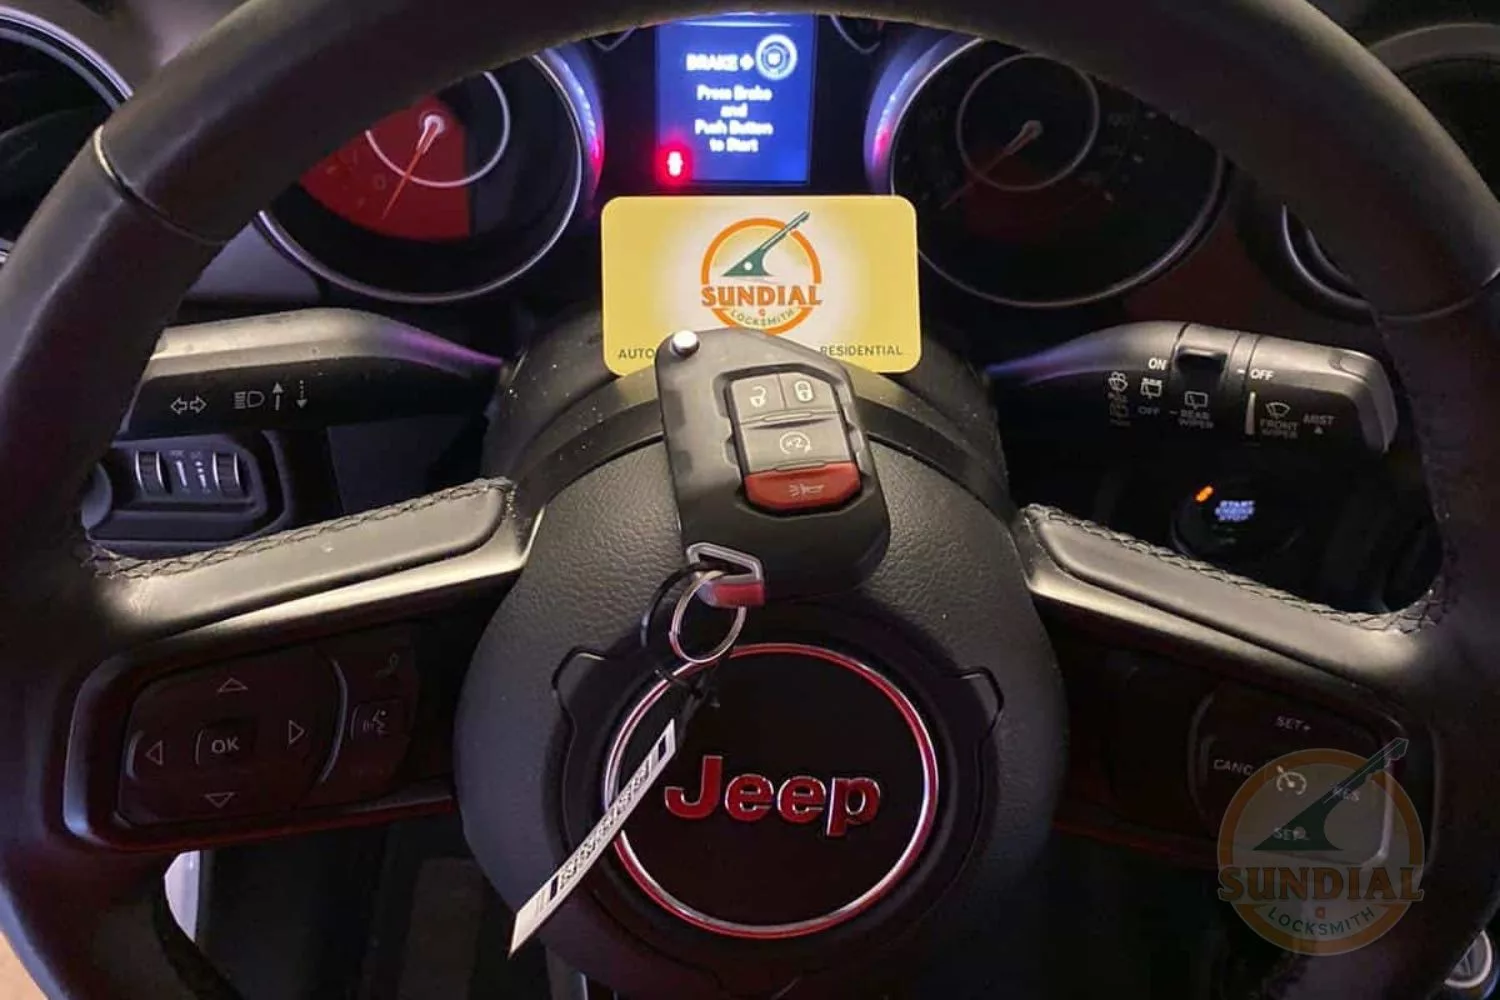 Jeep car key on steering wheel with access card.